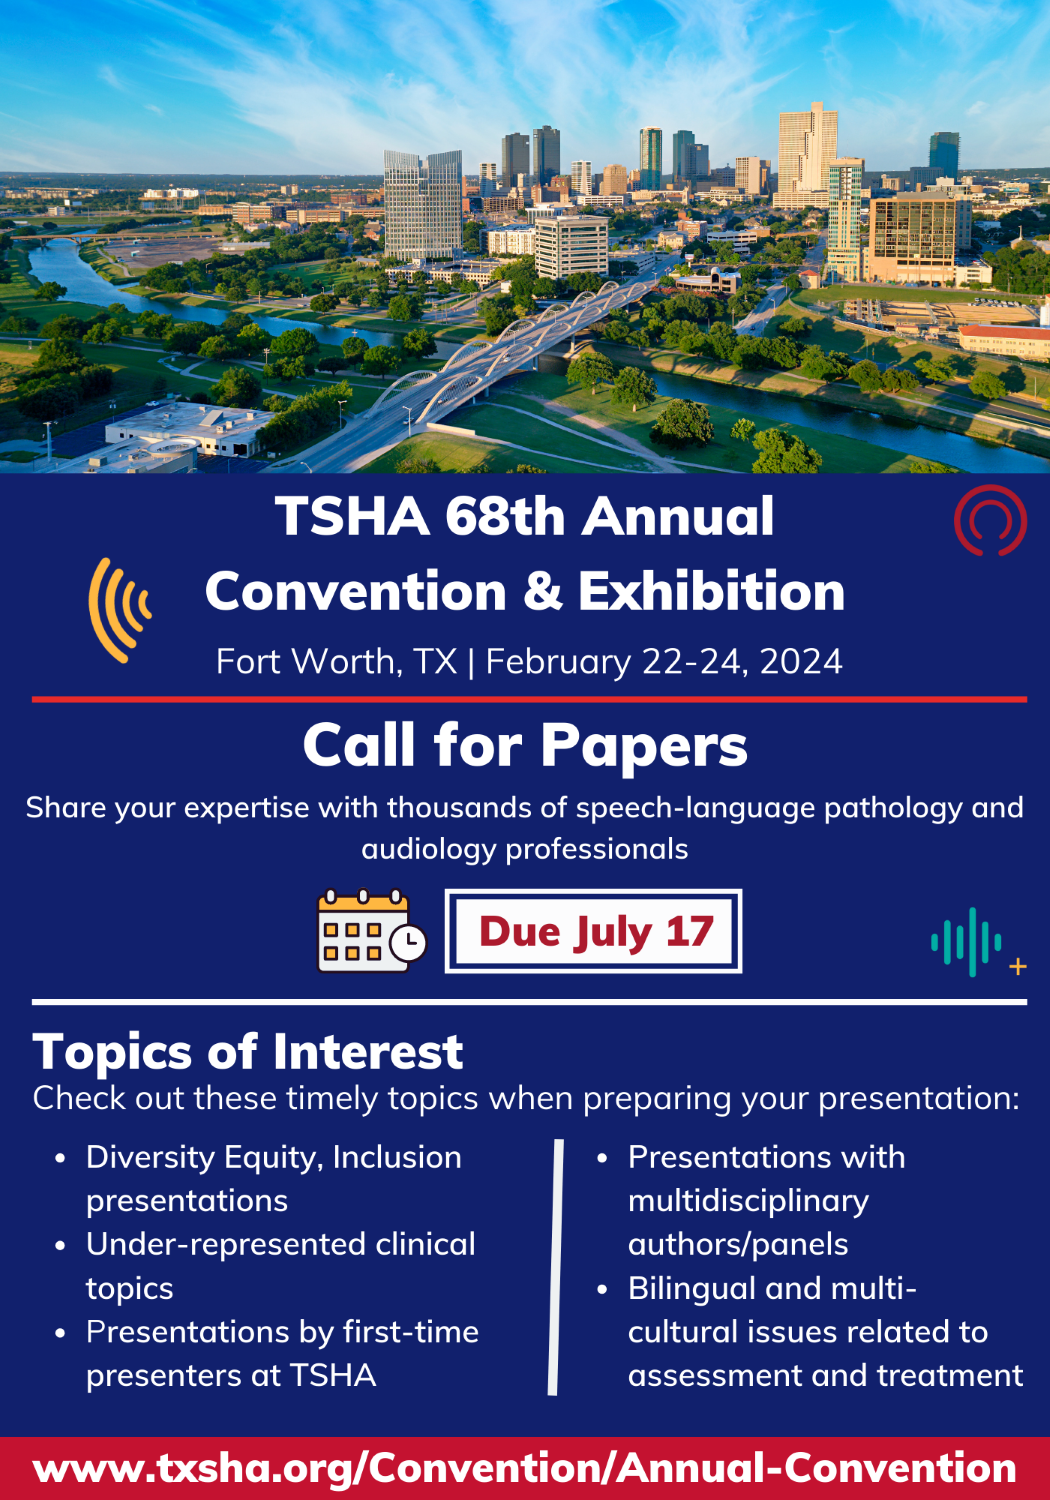 TSHA Call for Papers Opens June 5